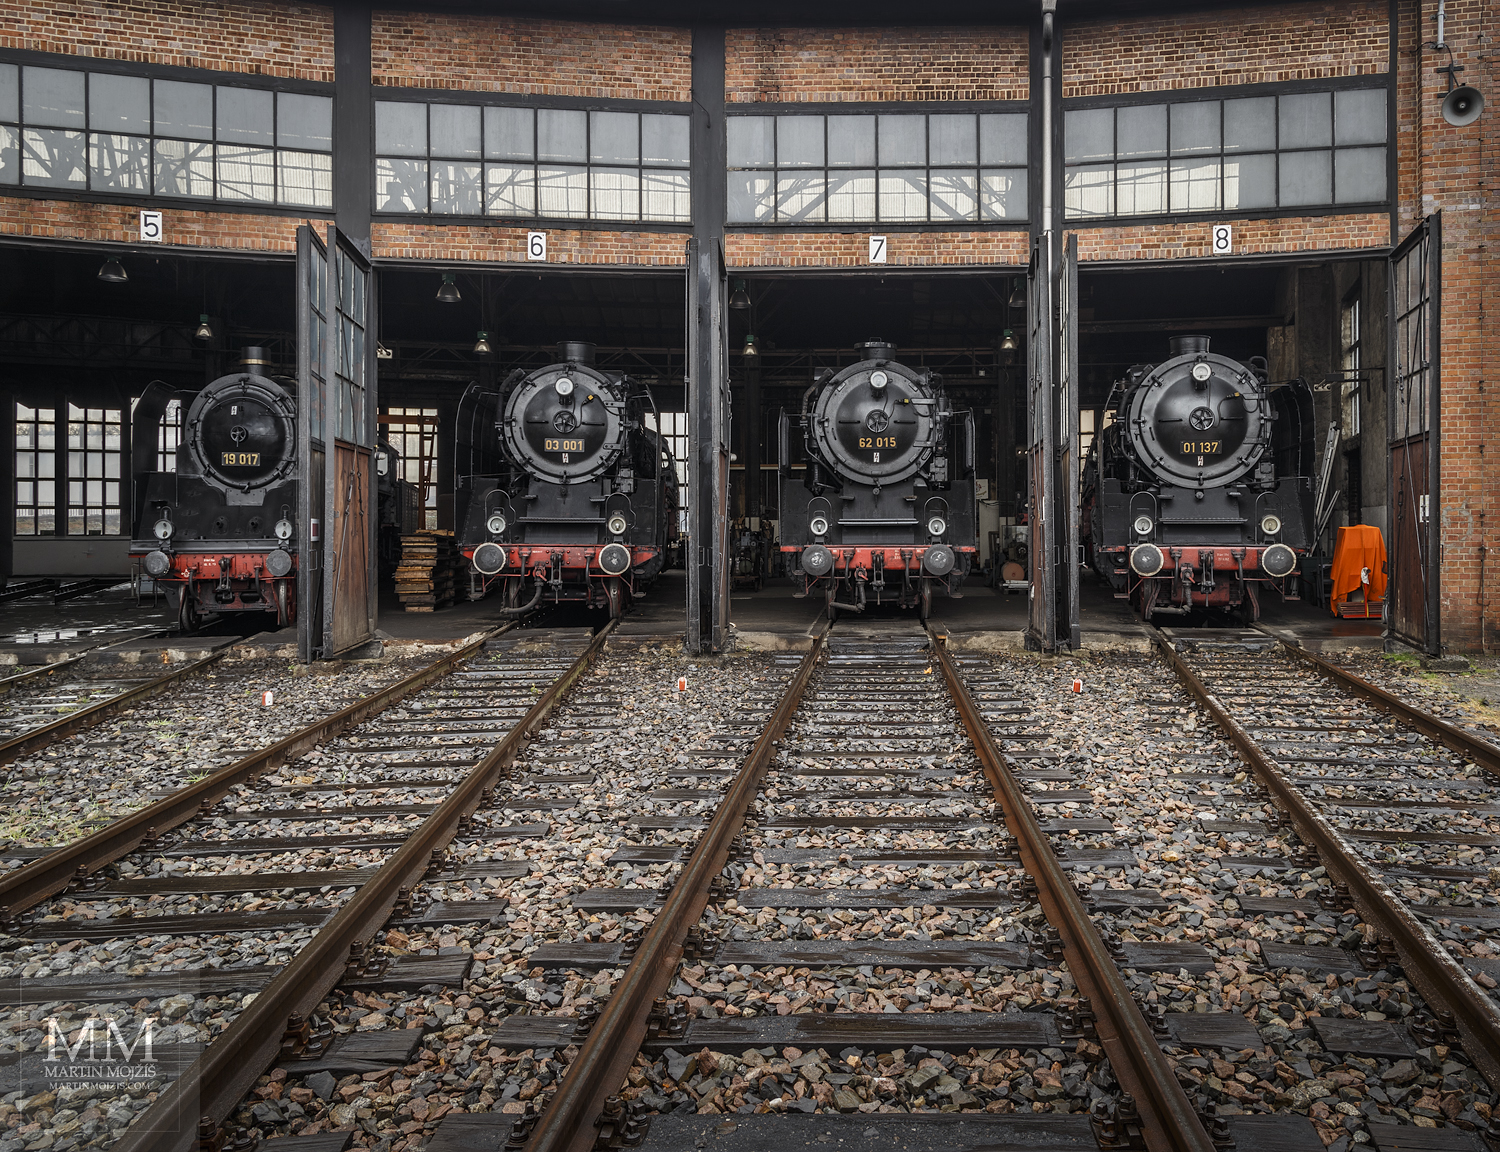 Large format, fine art photograph of steam locomotives in round railway depot close to turntable. Martin Mojzis.